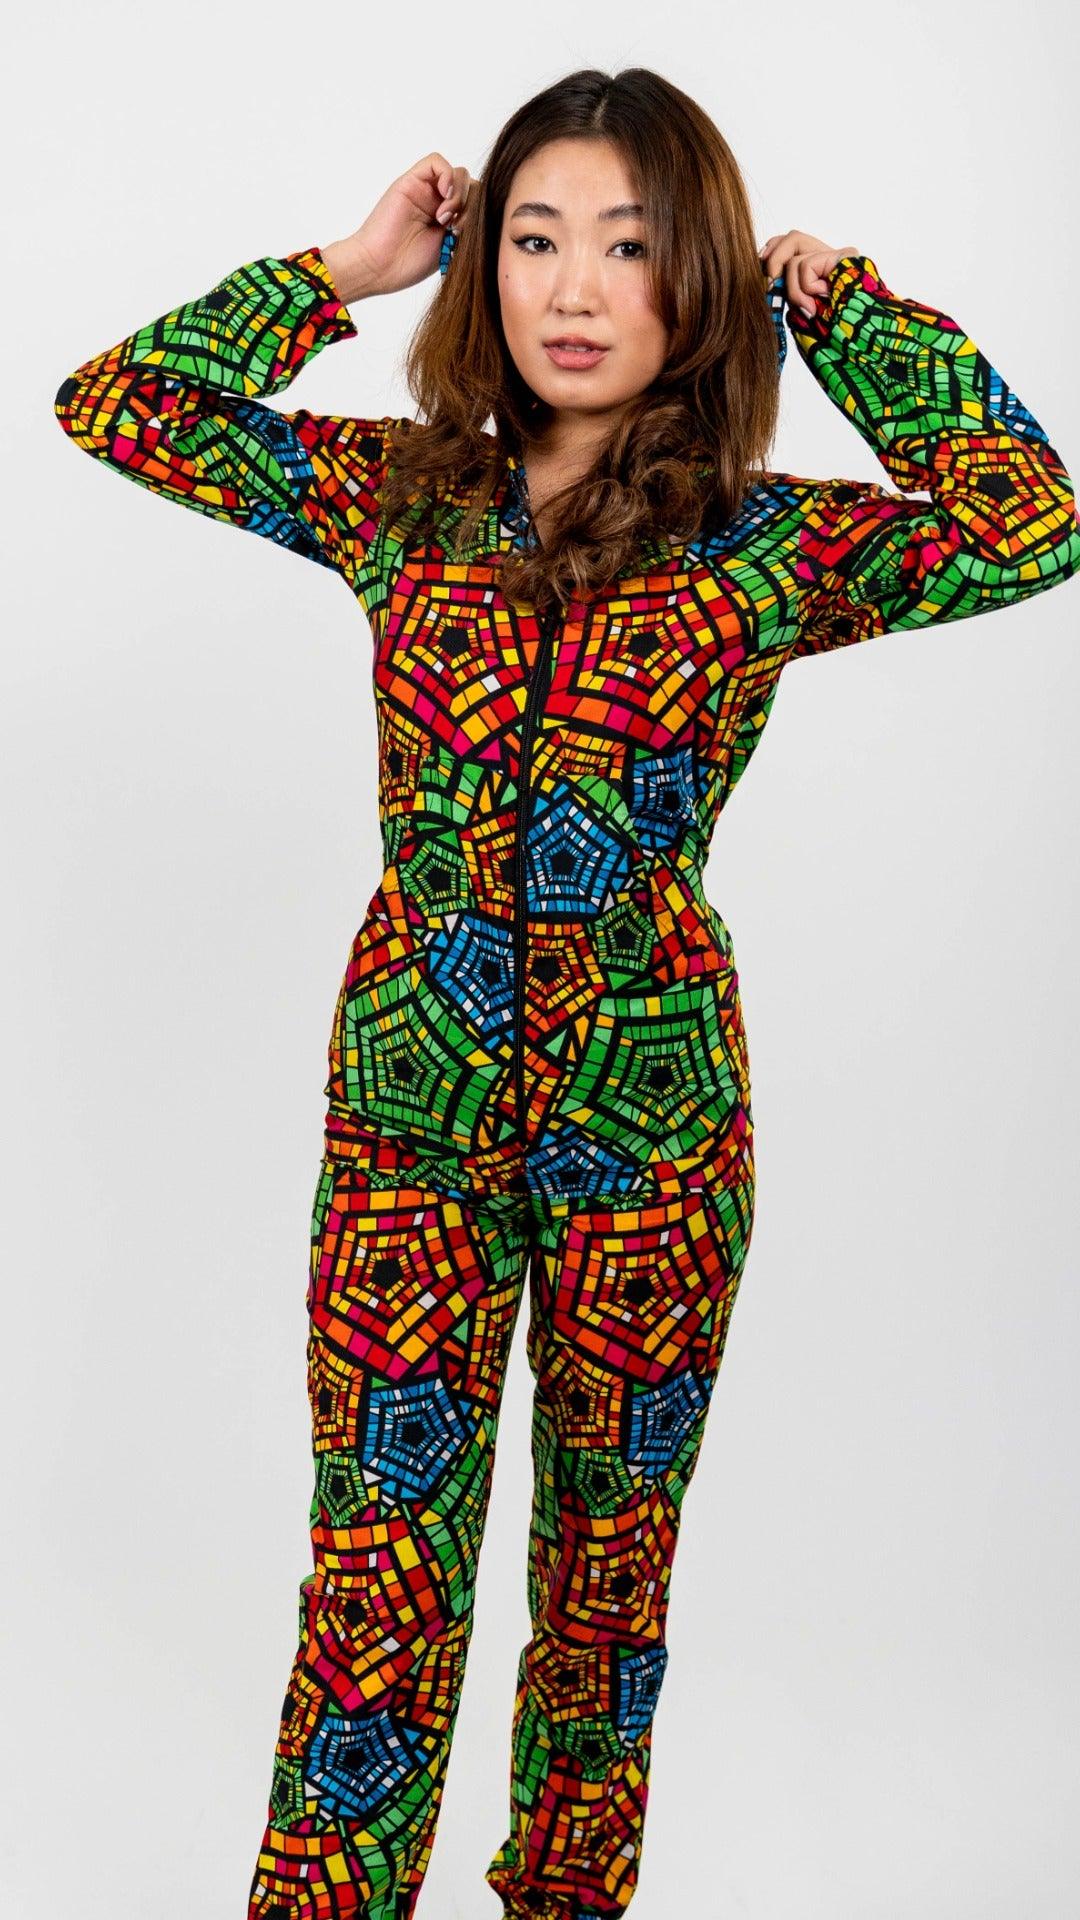 Green, red, and blue patterned full body onesie. Onesie is long sleeved and hooded, with a black front zipper and elastic ankle bands.